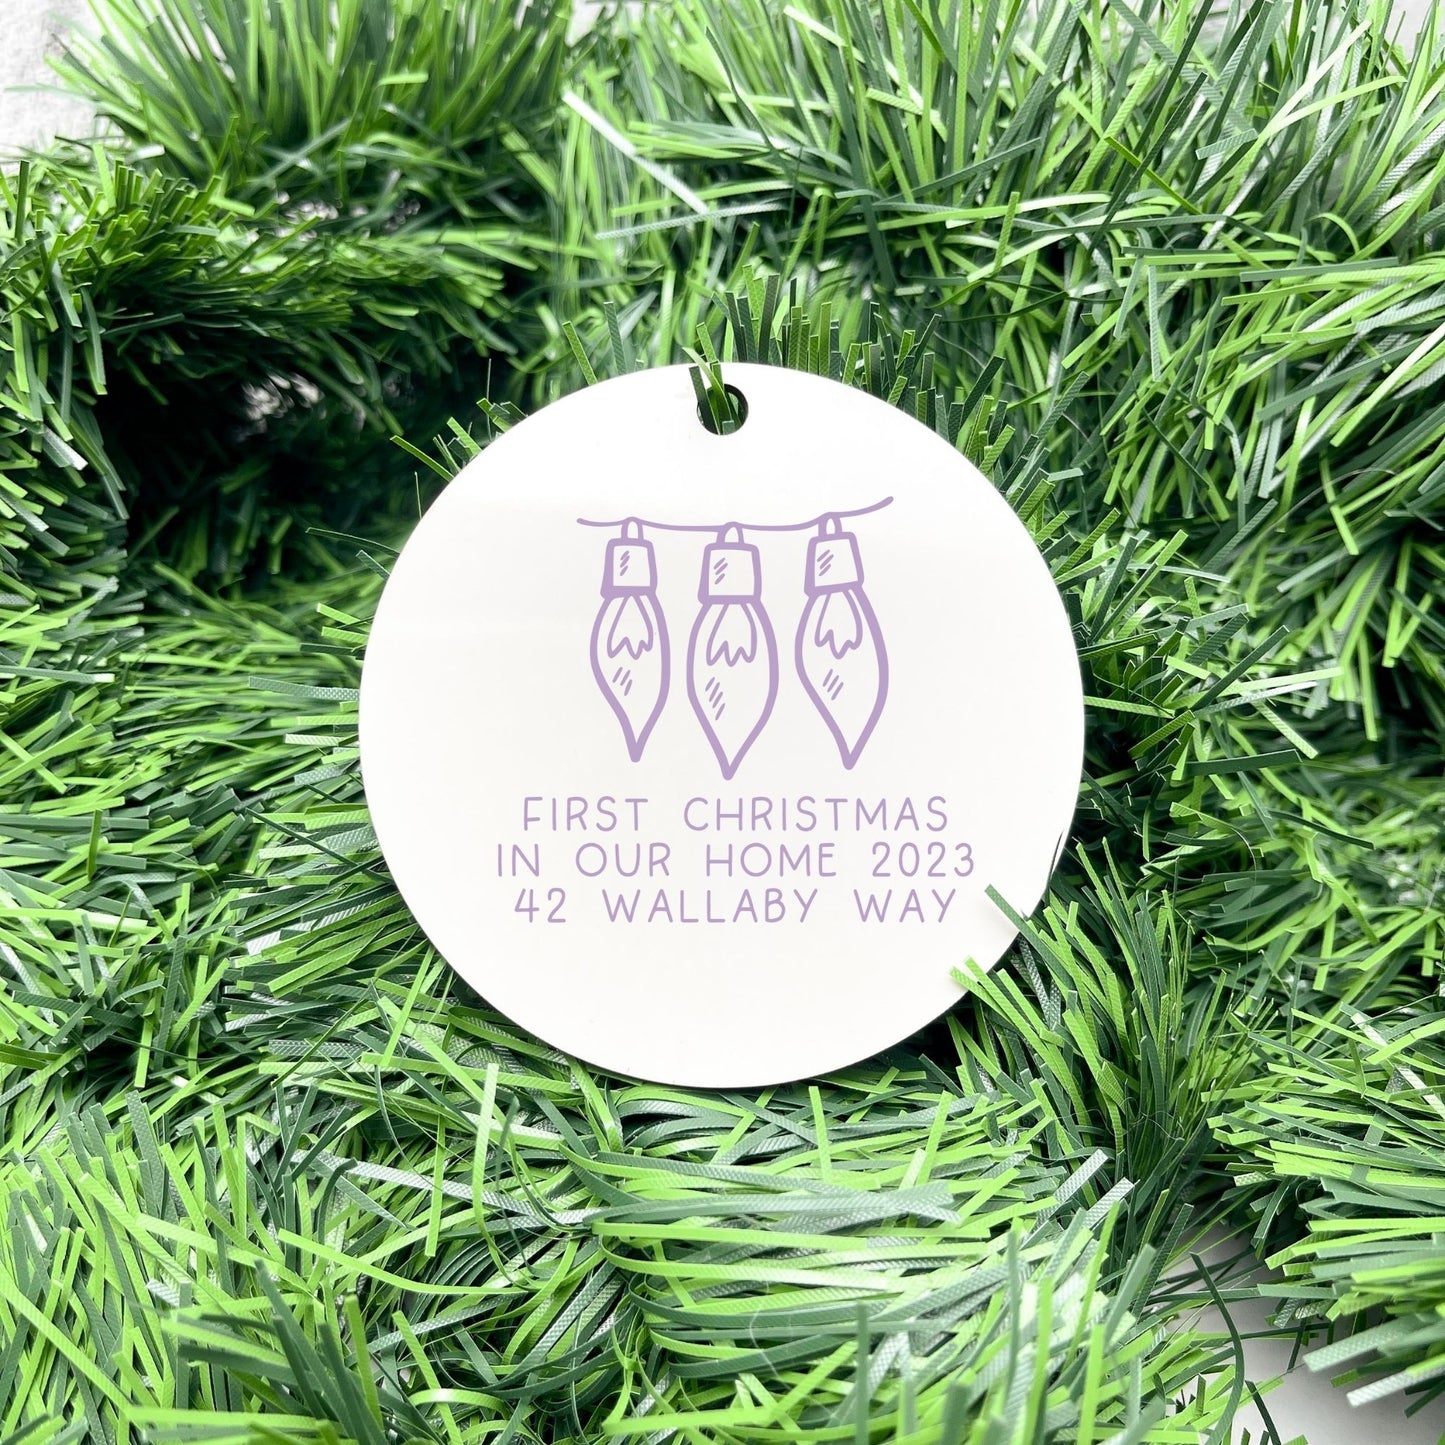 Personalised first Christmas in new home bauble, Housewarming Ornament, Cozy Home Decoration, new home bauble, holiday decor, christmas tree